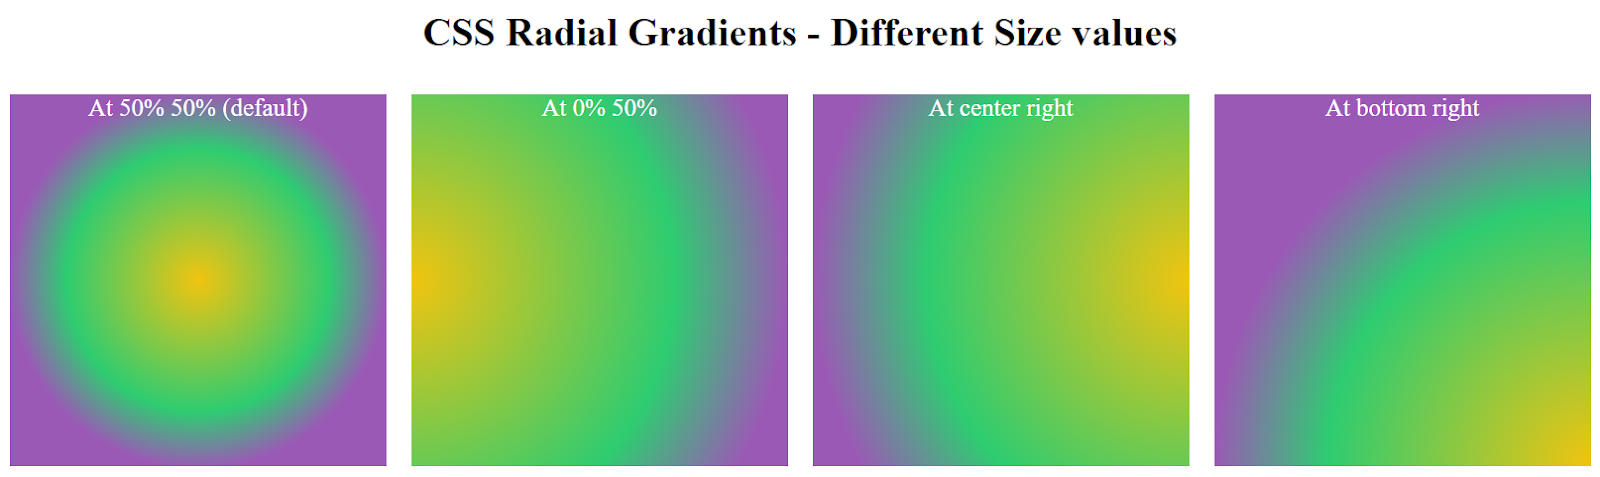 Radial CSS Gradients With Different Position Values 